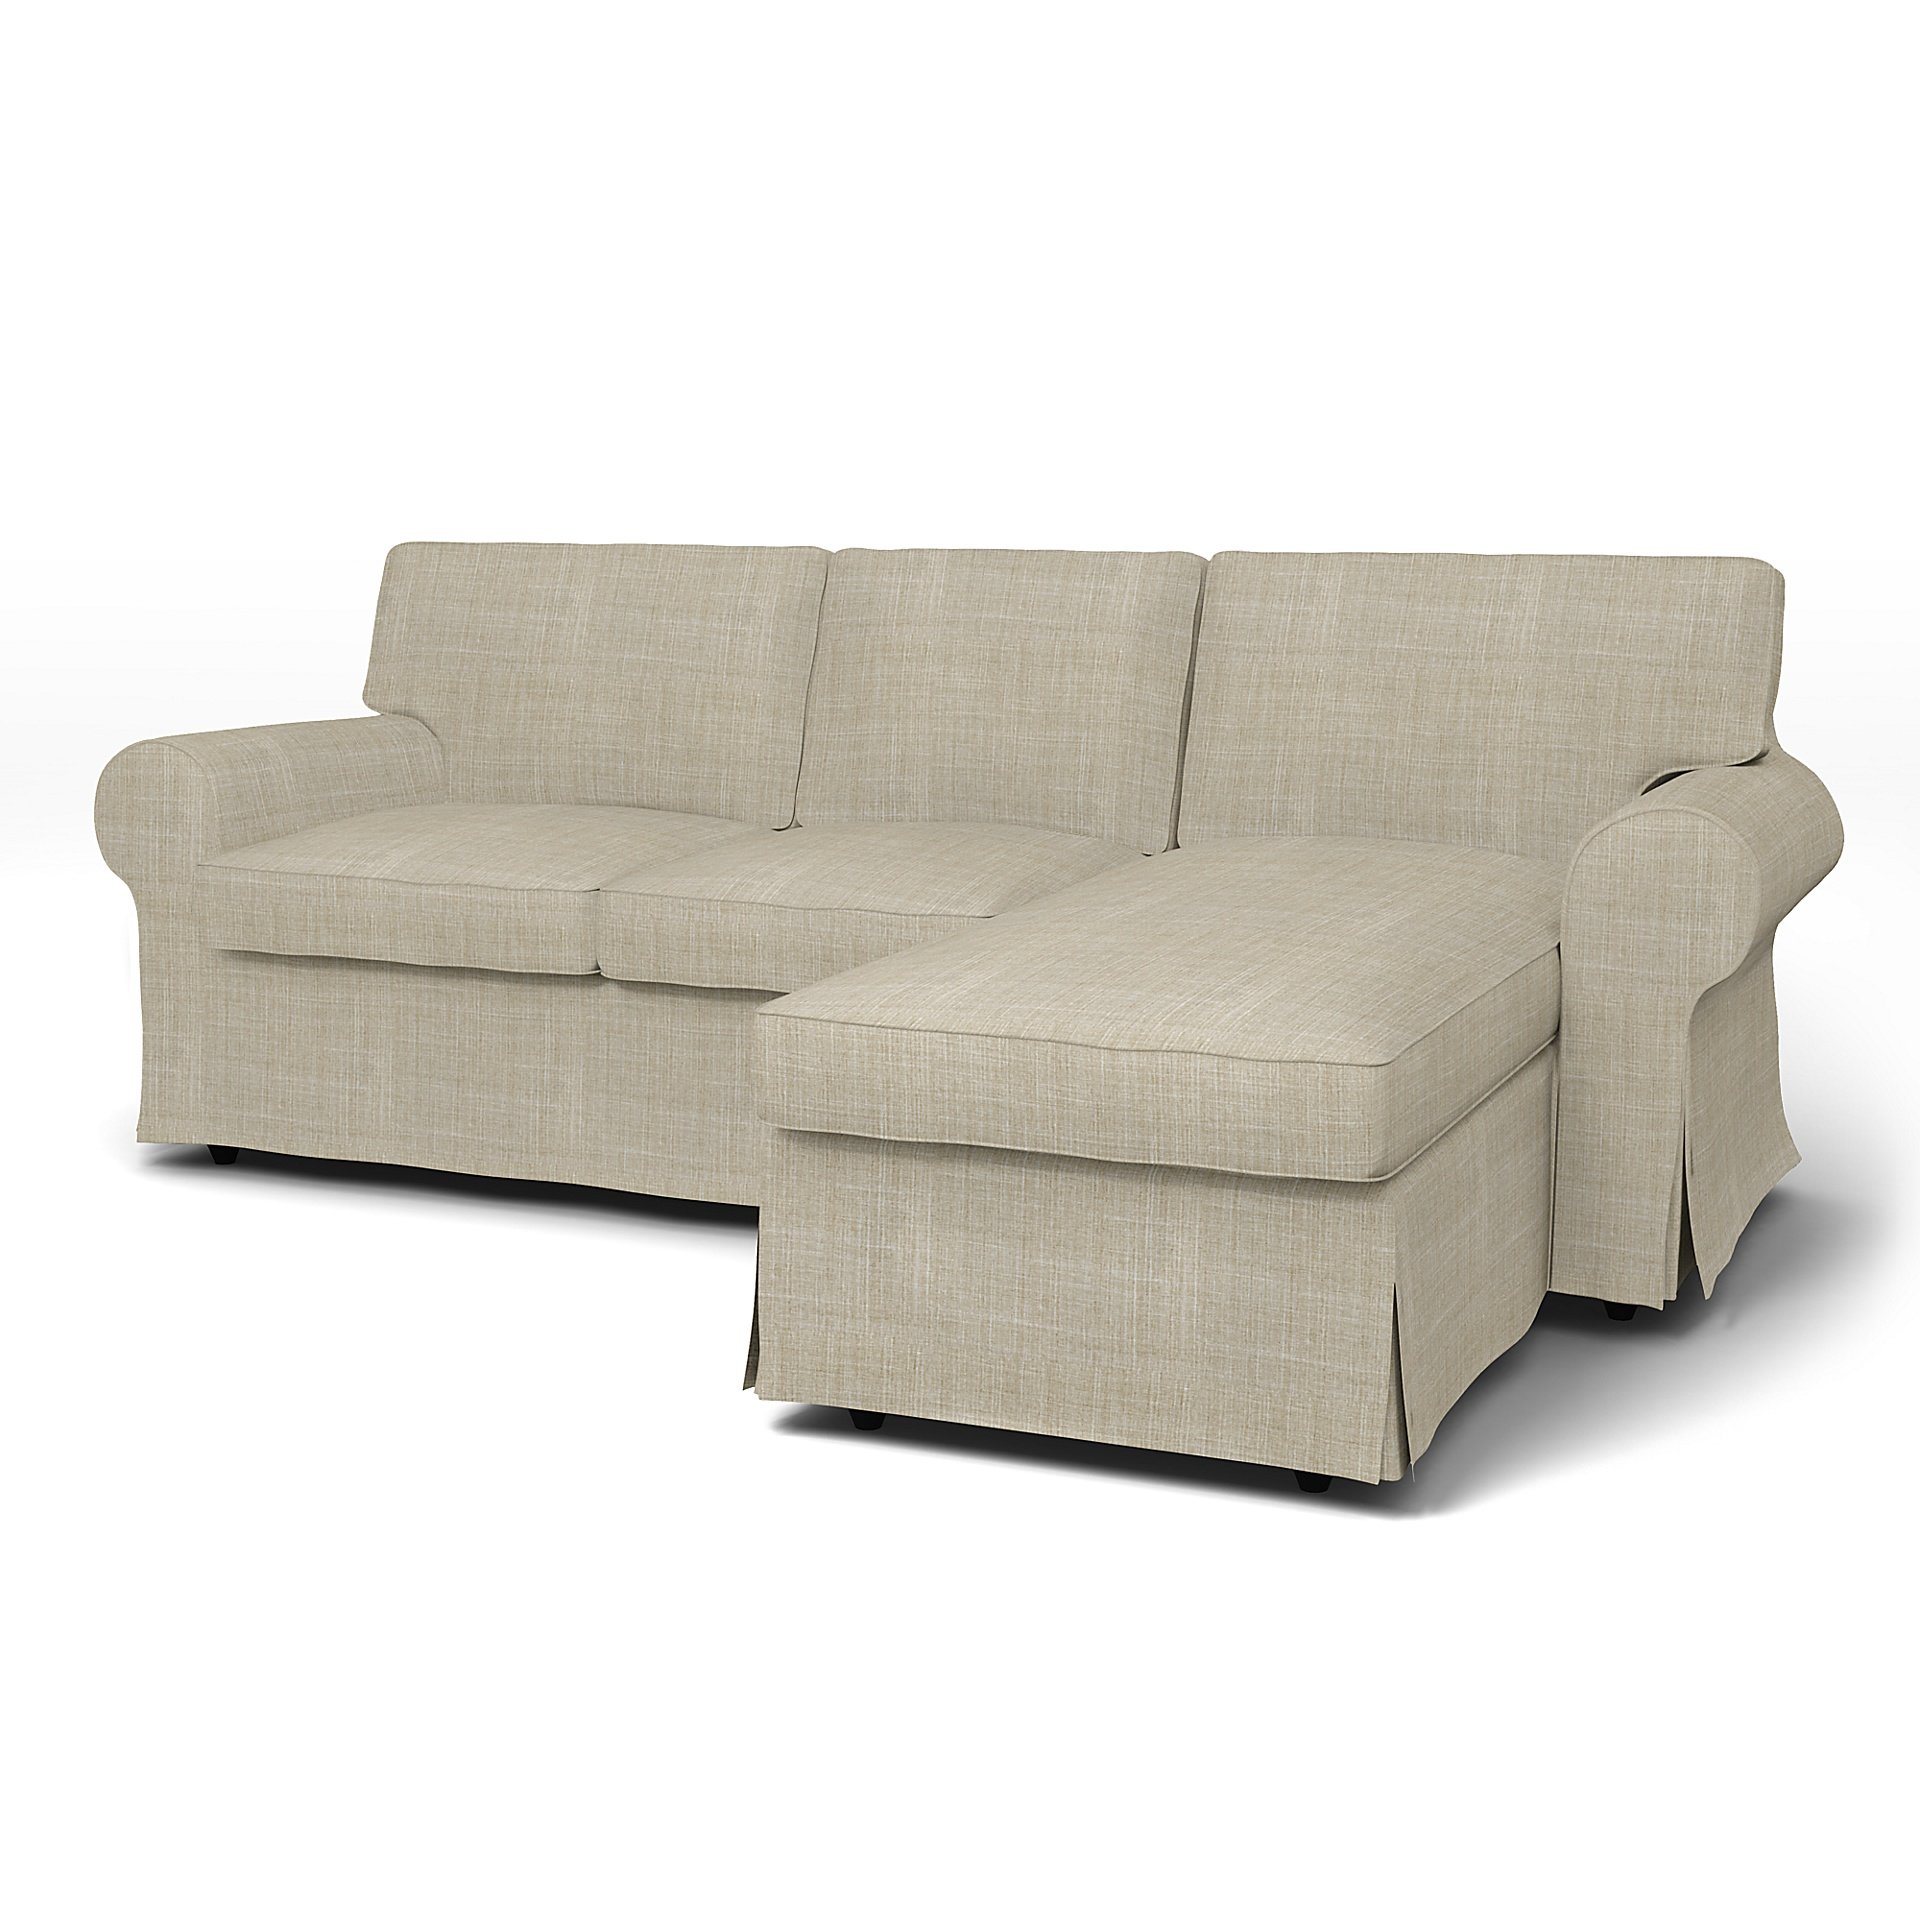 IKEA - Ektorp 3 Seater Sofa with Chaise Cover, Sand Beige, Boucle & Texture - Bemz